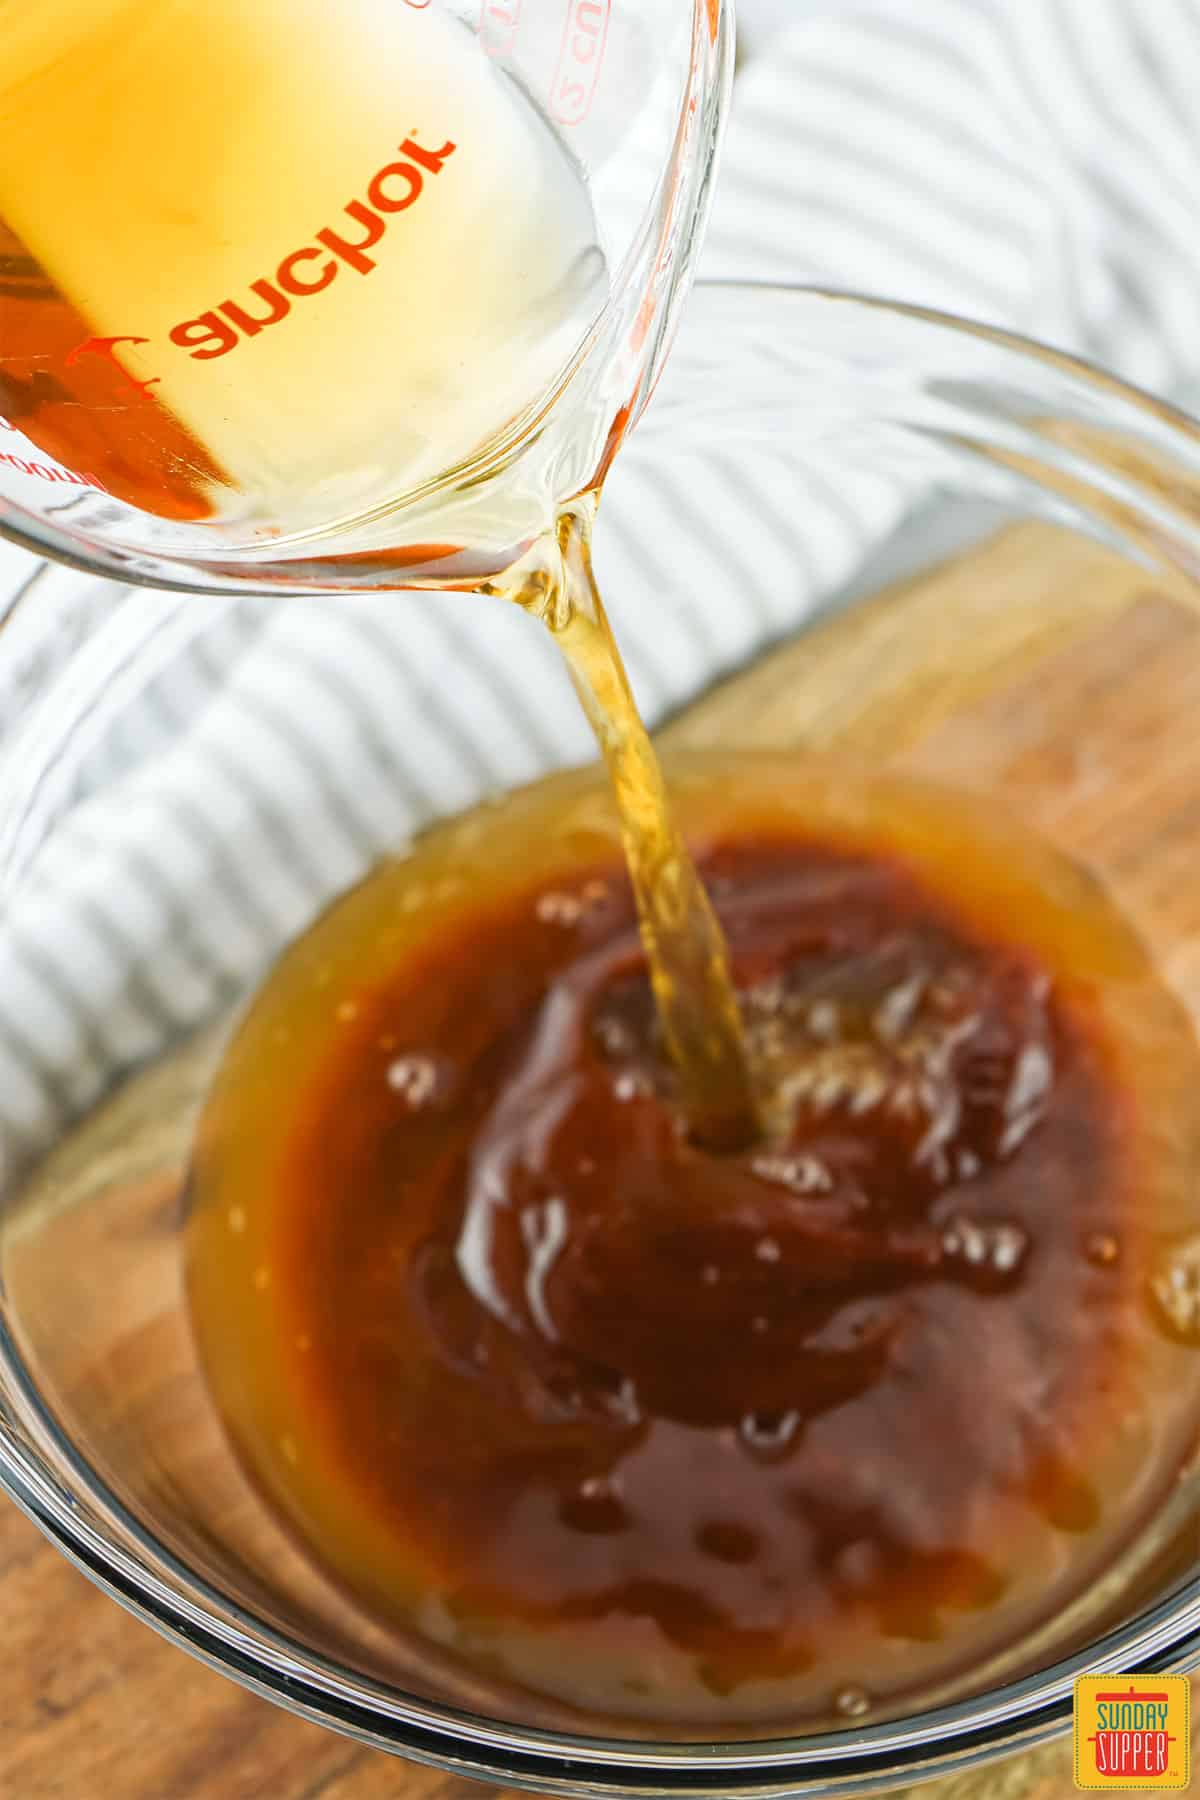 Pouring vinegar in a bowl with bbq sauce